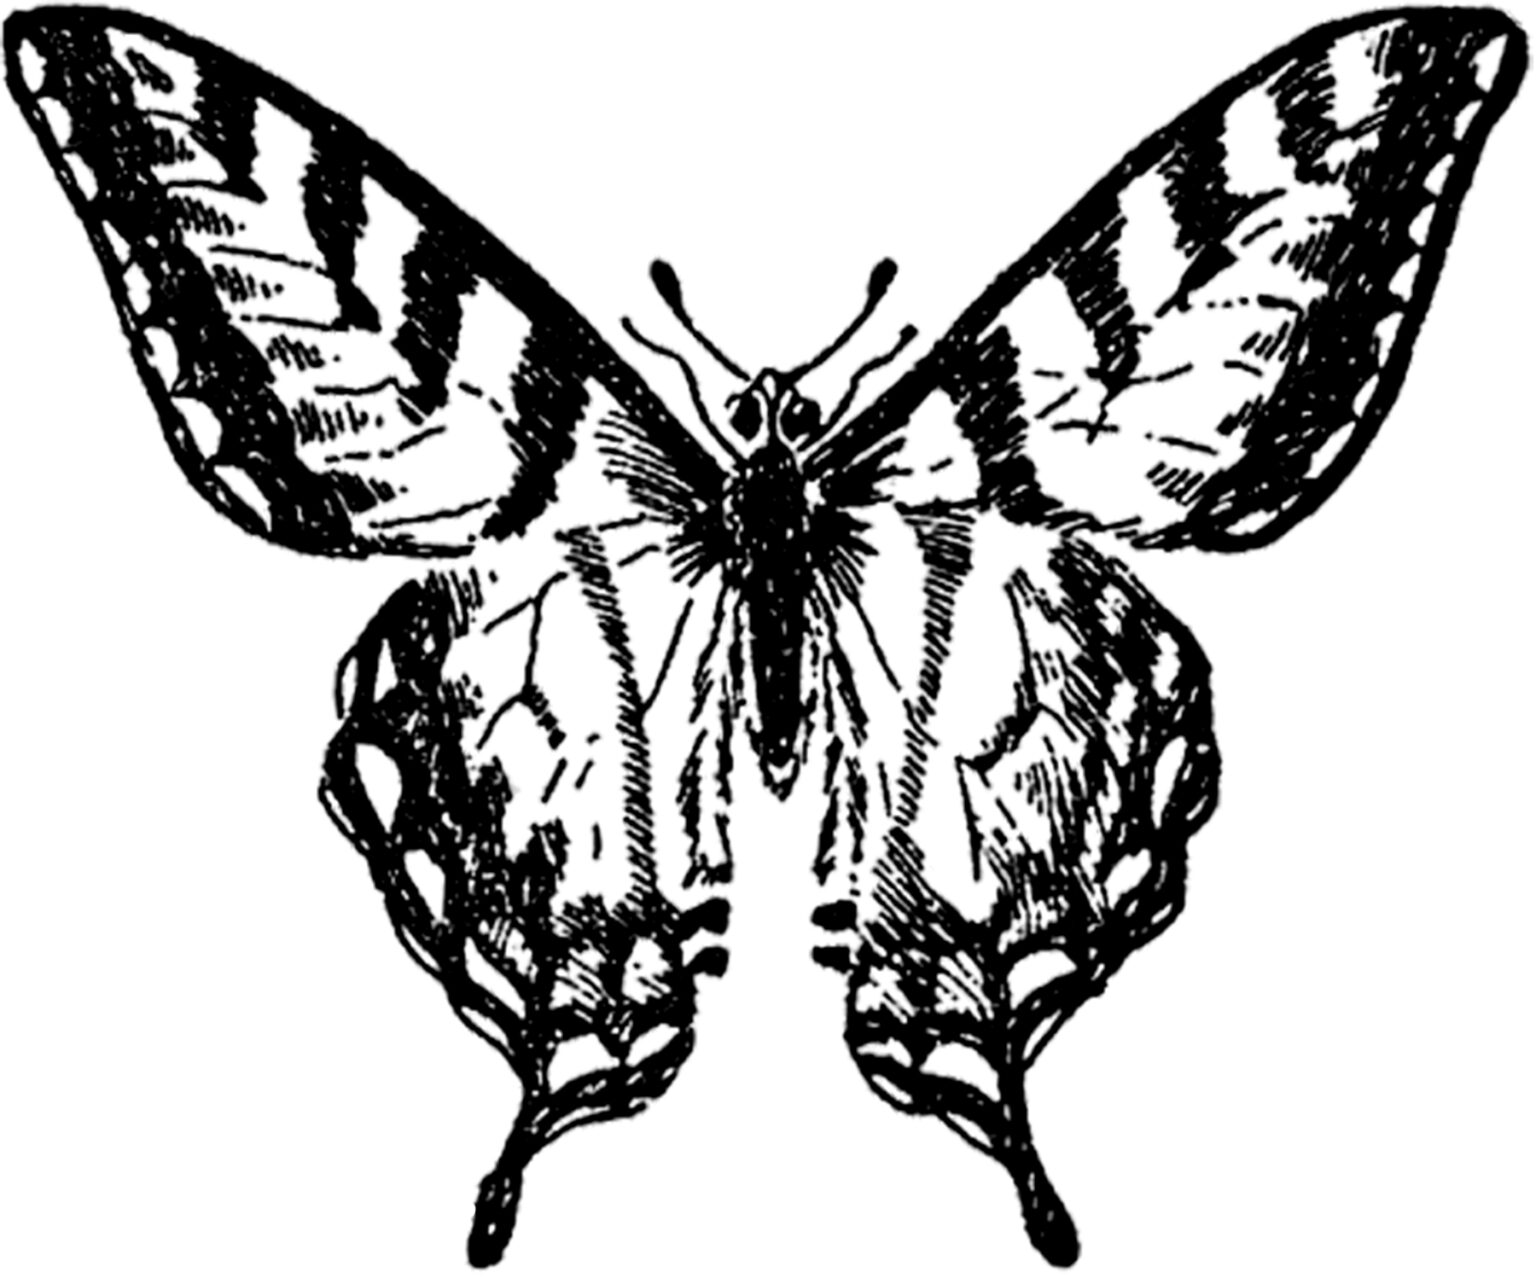 11 Black and White Butterfly Clipart! - The Graphics Fairy